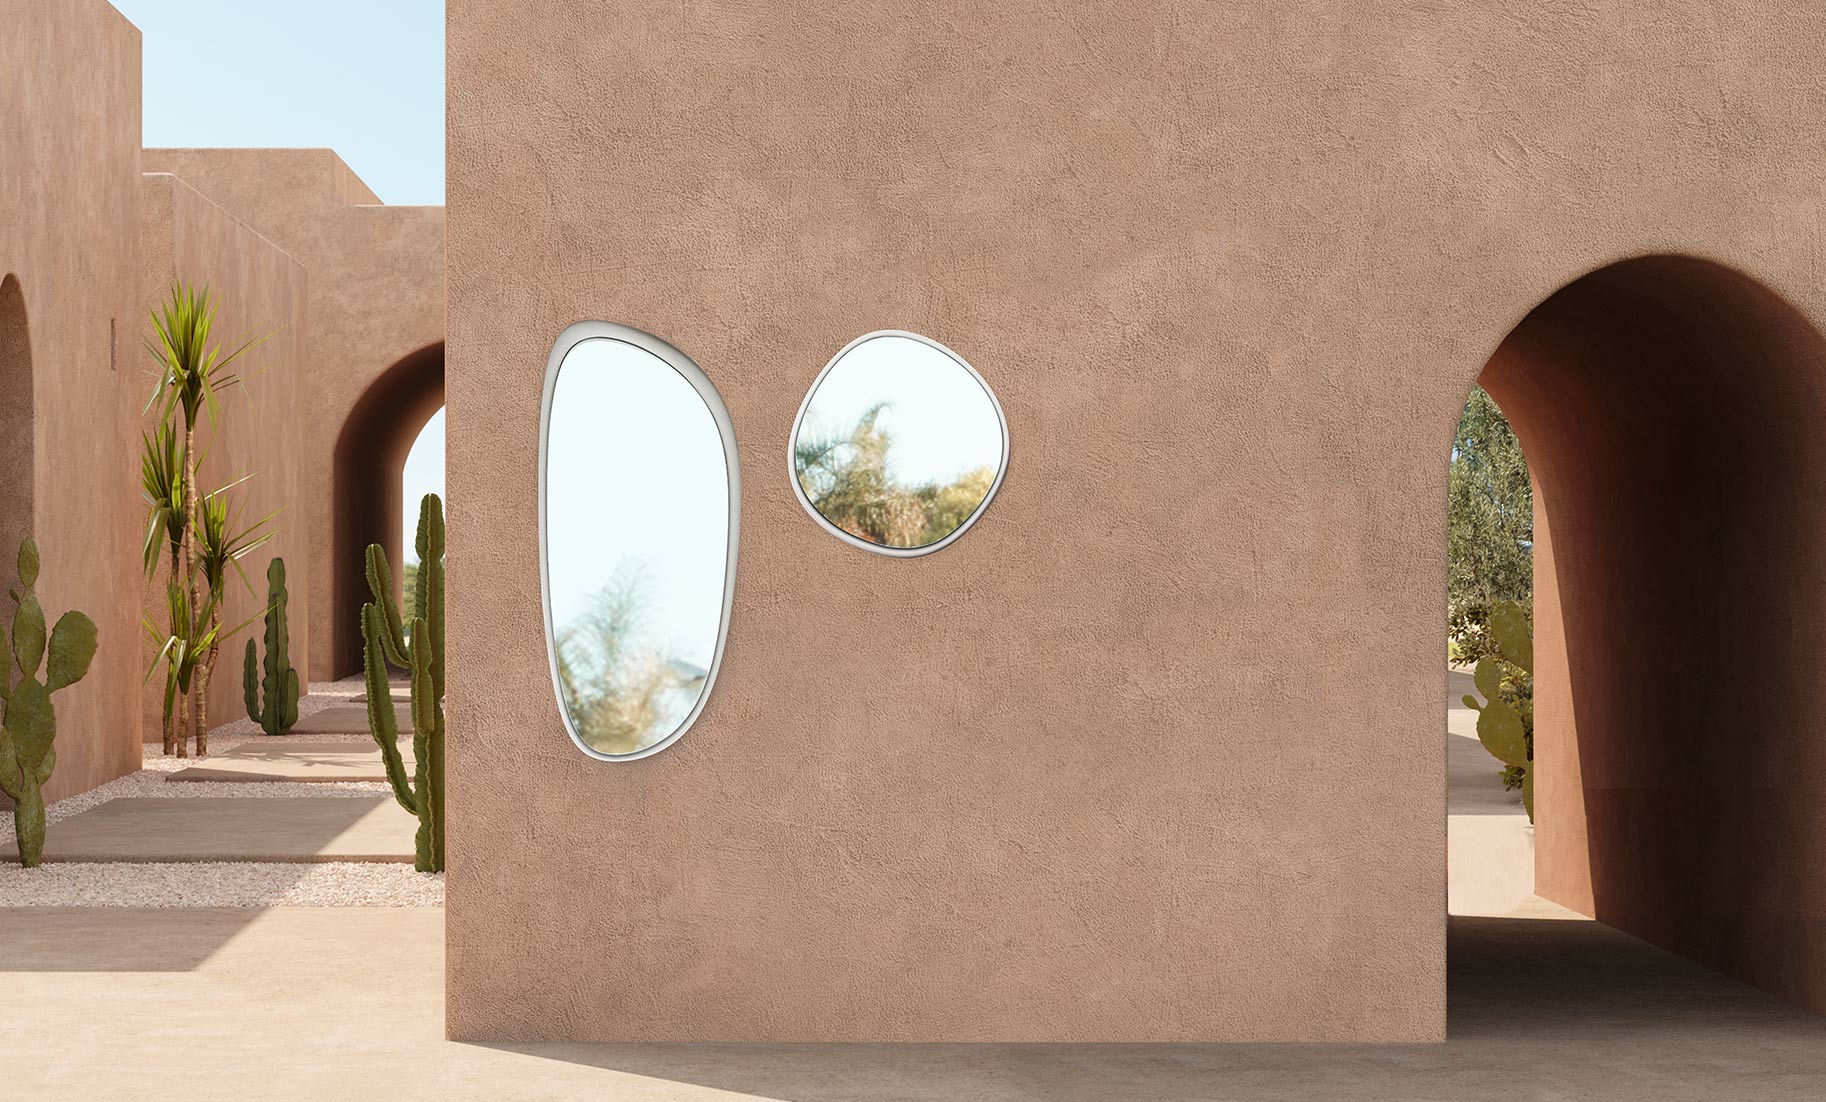 Gusa Mirror Salt White Frame in earthy render wall, for indoor/outdoor use by Muundo